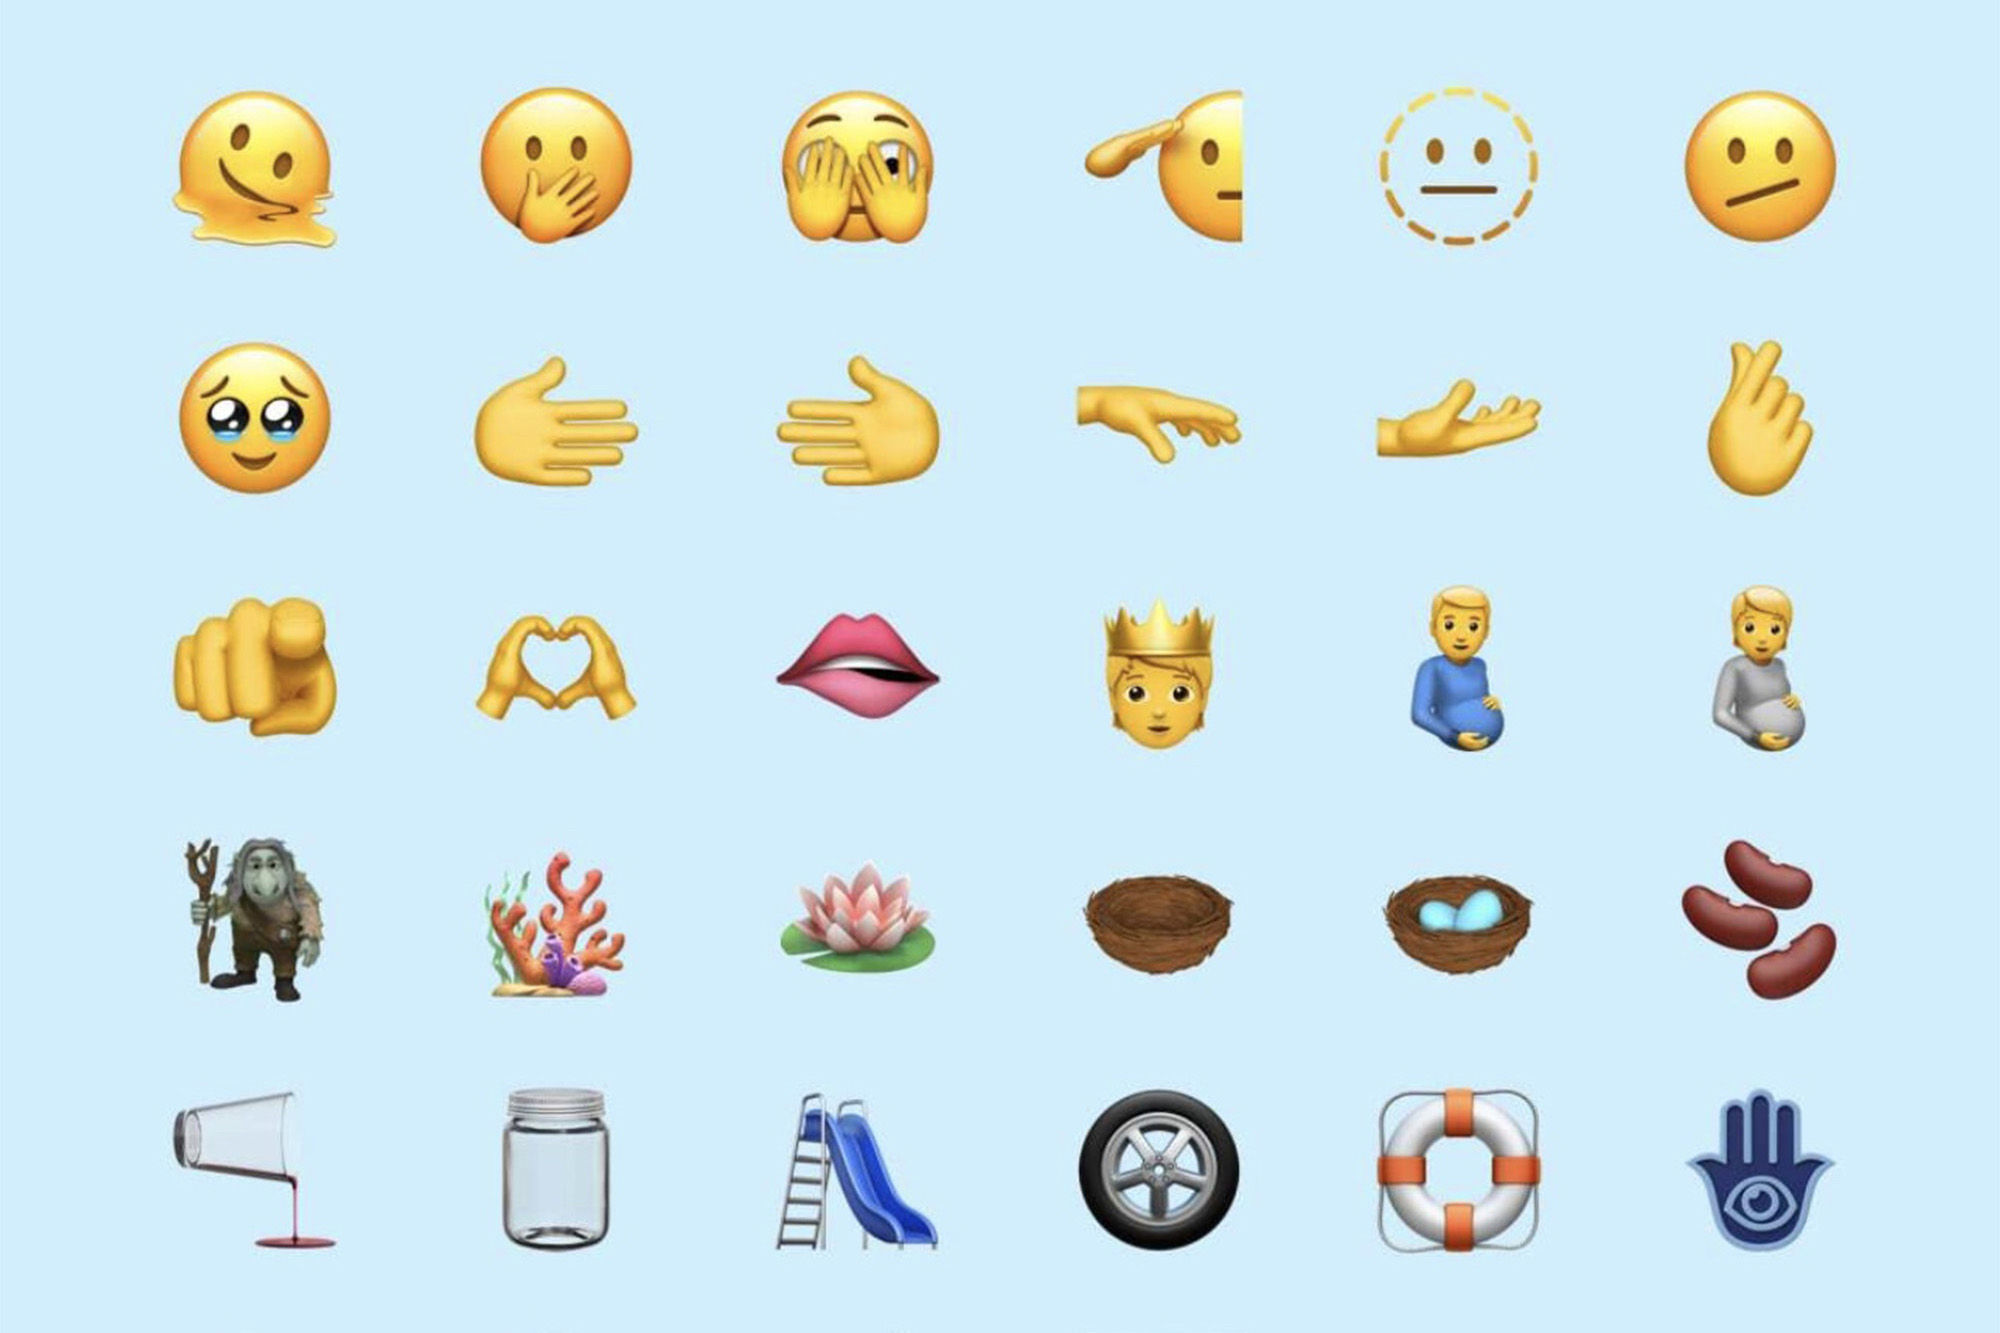 Pregnant man emoji on Apple update angers some, lauded by others